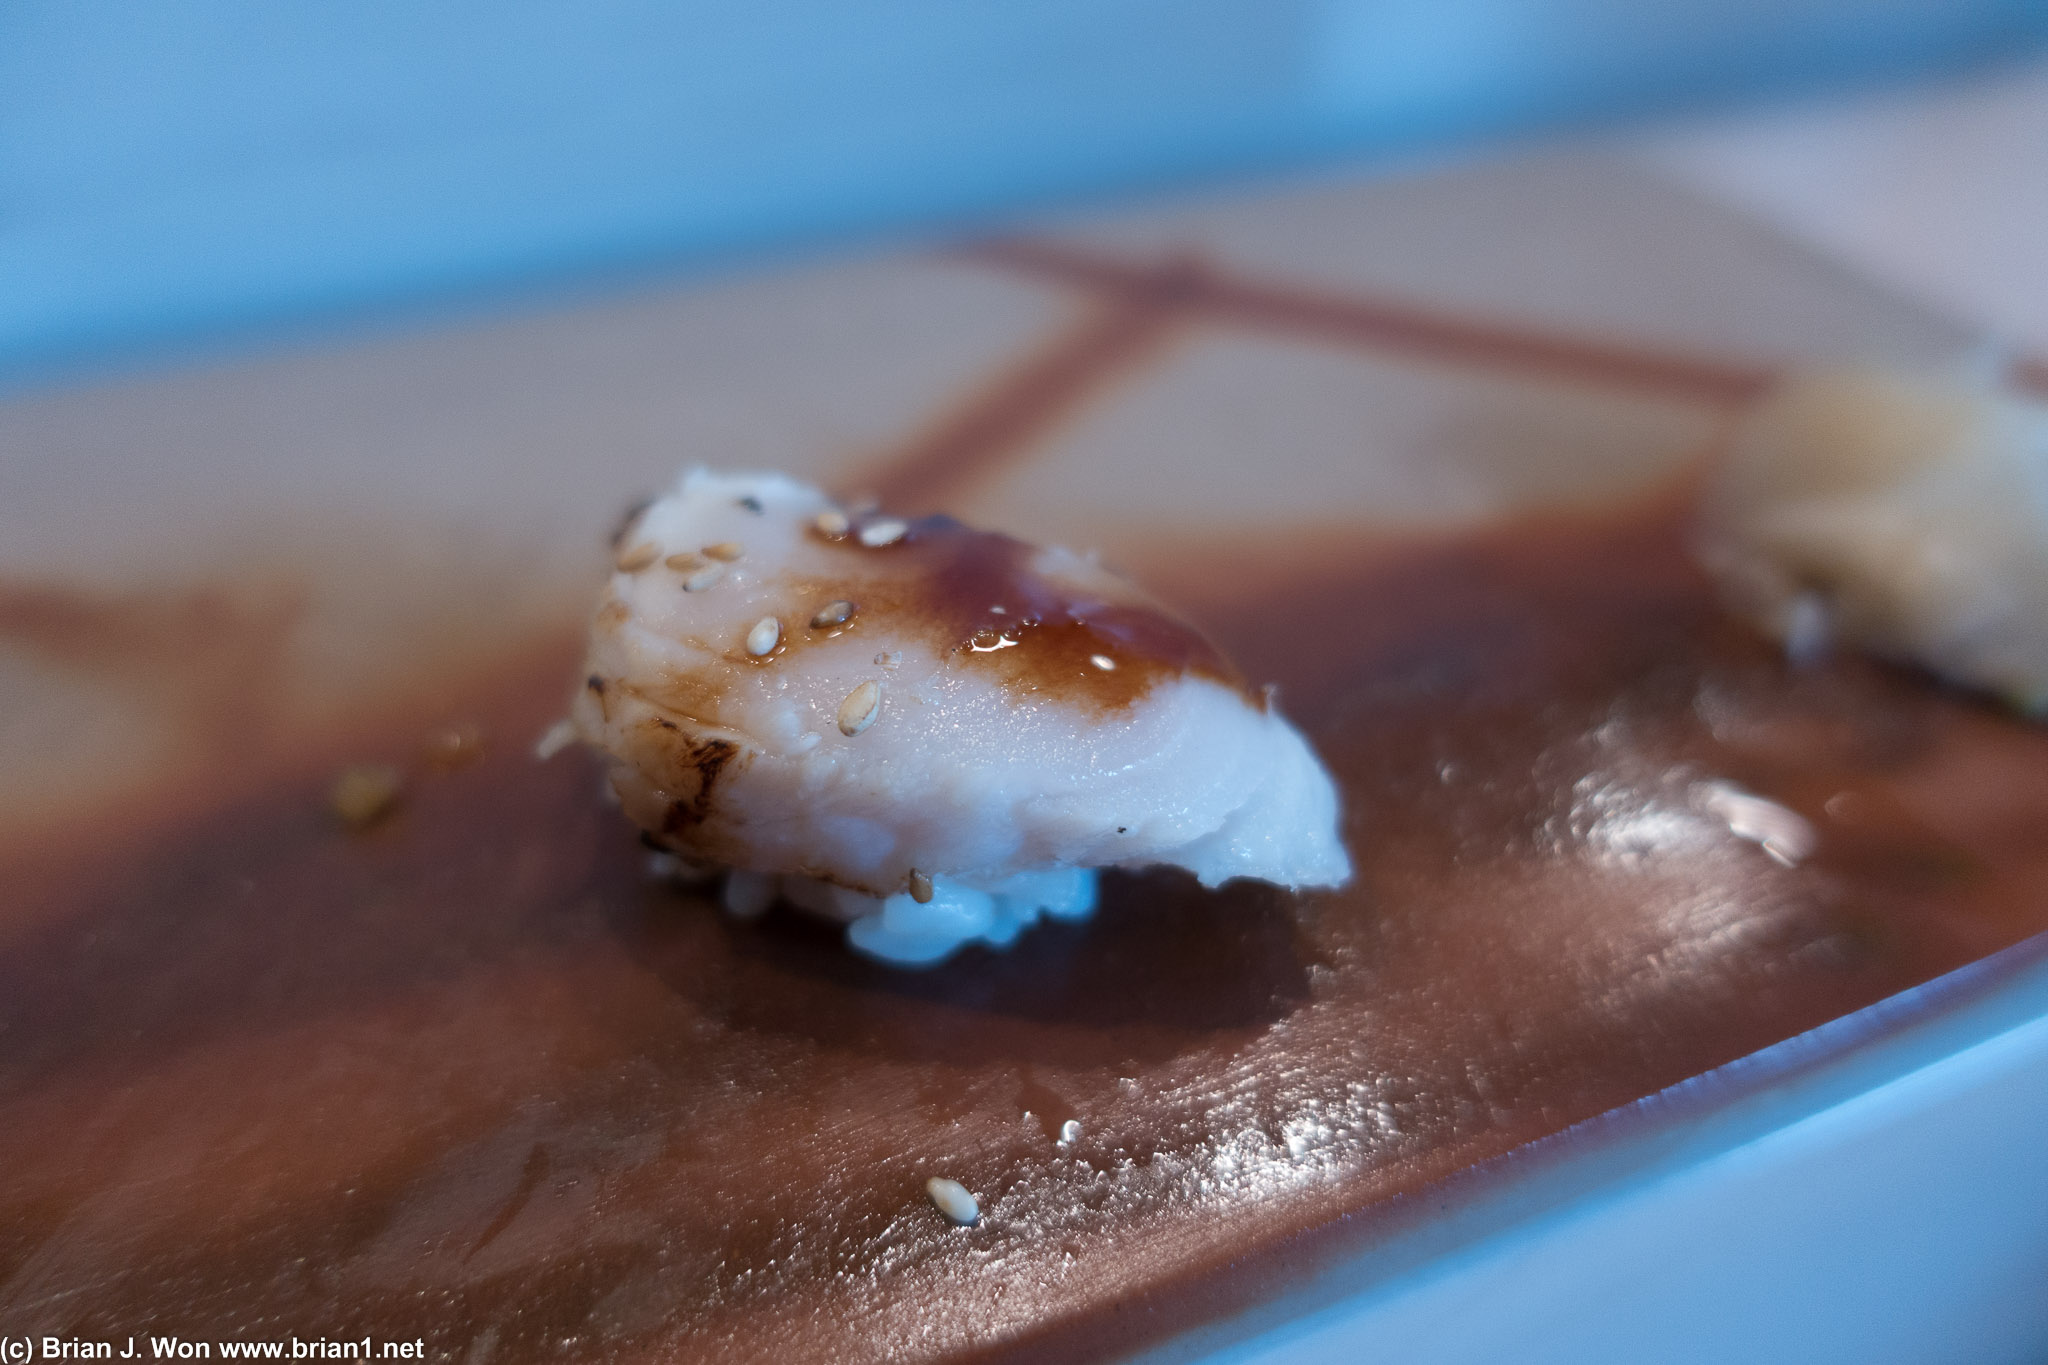 Seared butterfish. Quite good, not a usual sushi item.